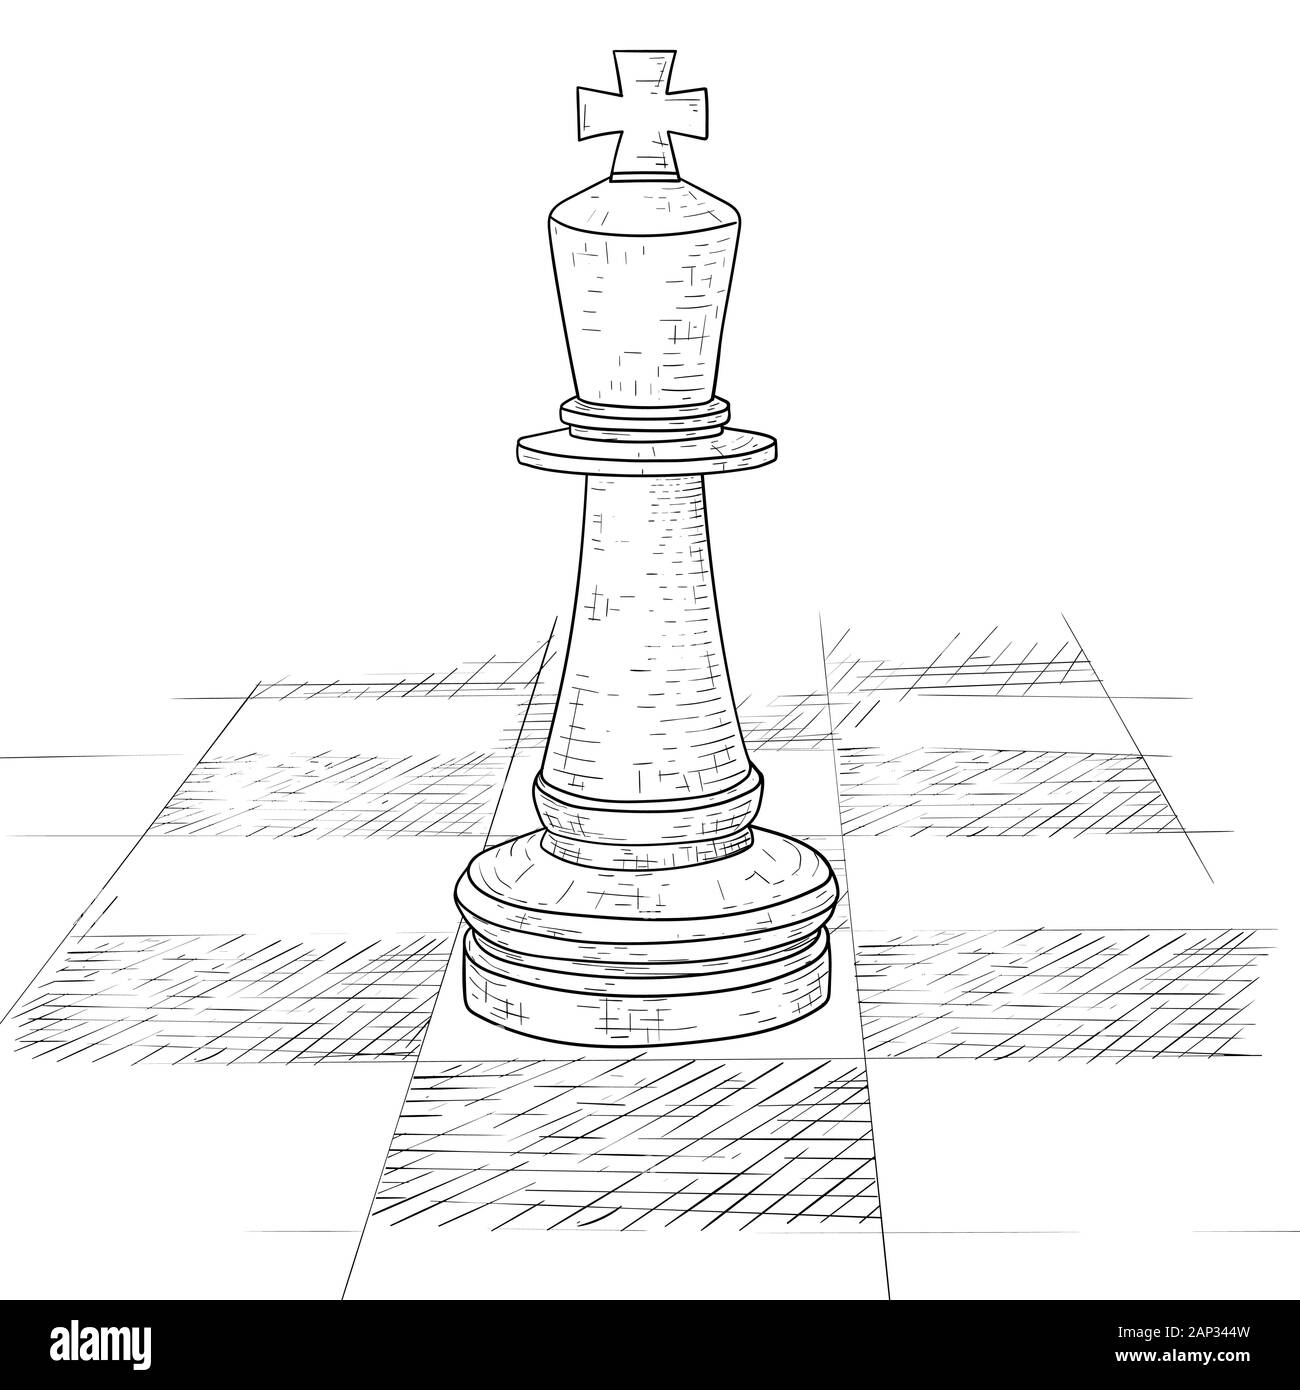 How to draw a Chess Board  YouTube